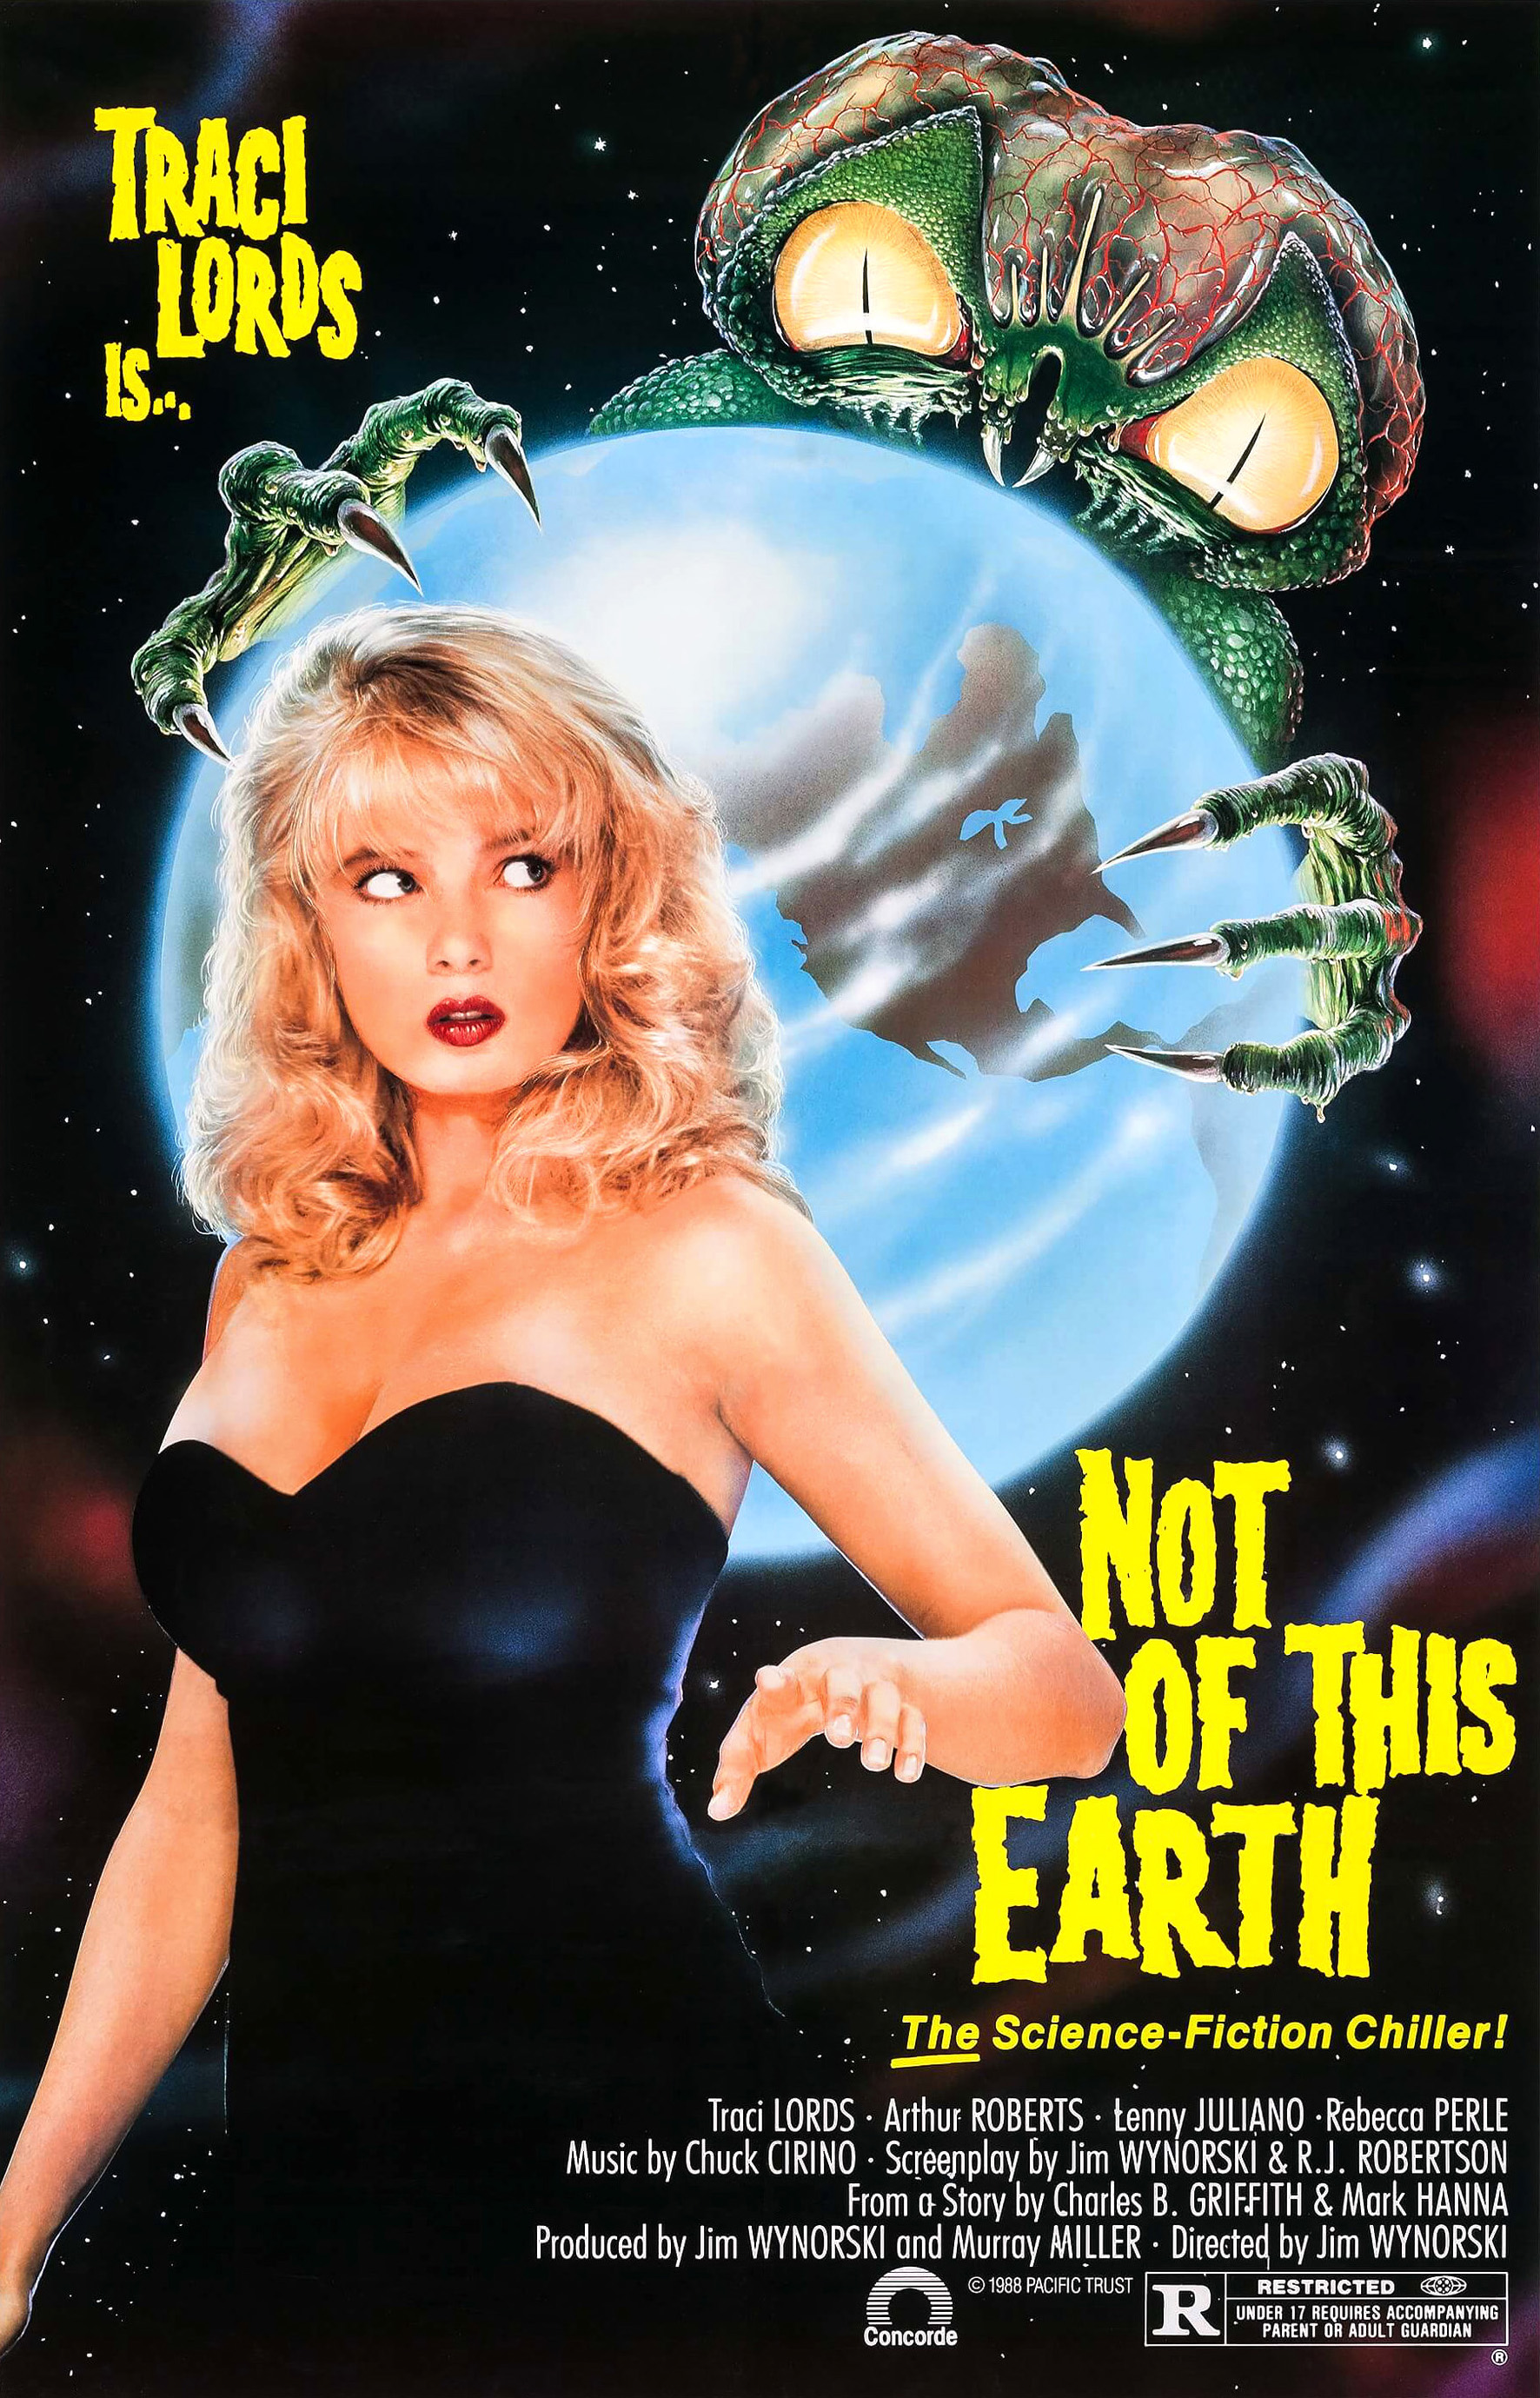 antonio bosch recommends traci lords x rated movies pic